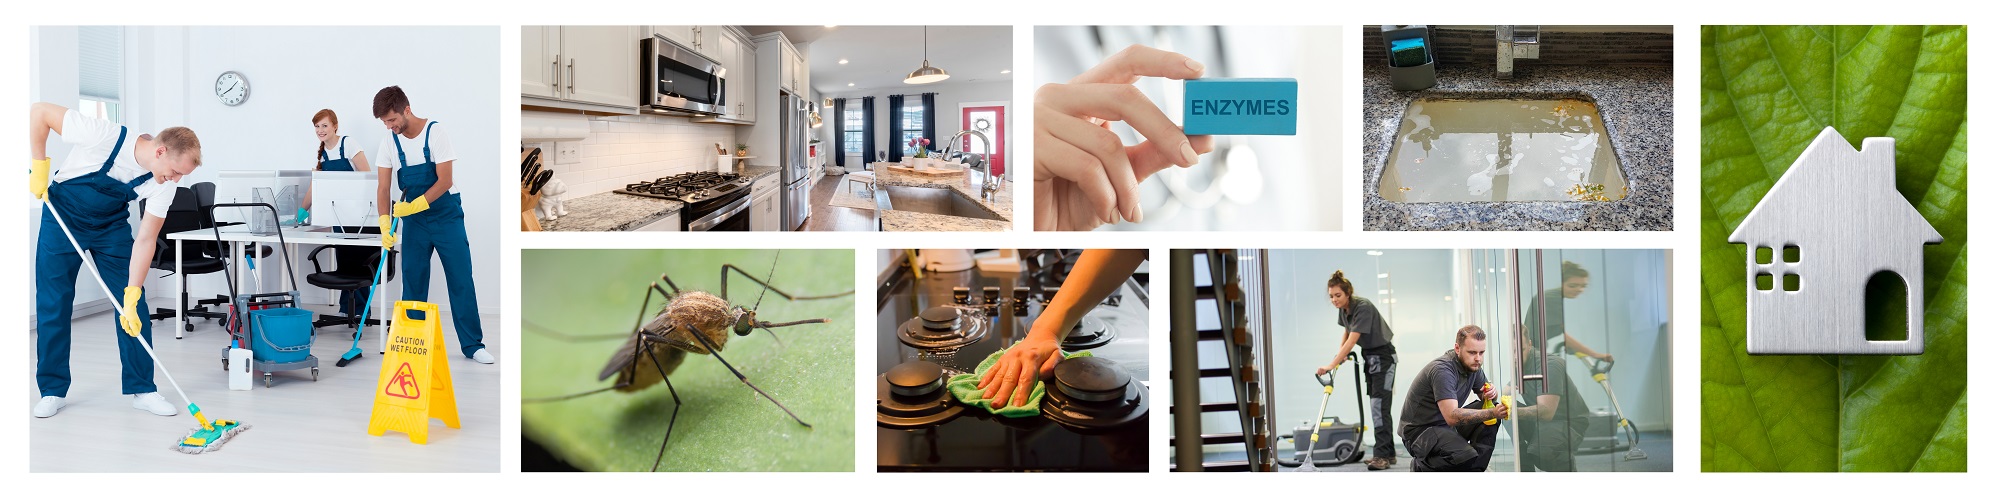 know more about various alternatives offered in our bio-enzymatic cleaning range to work with drain pipe cleaning, unblock the drainage water systems, surface cleaners that do not harm the material and reduce the organic matter and stains to water soluble molecules that can be easily washed and disposed off